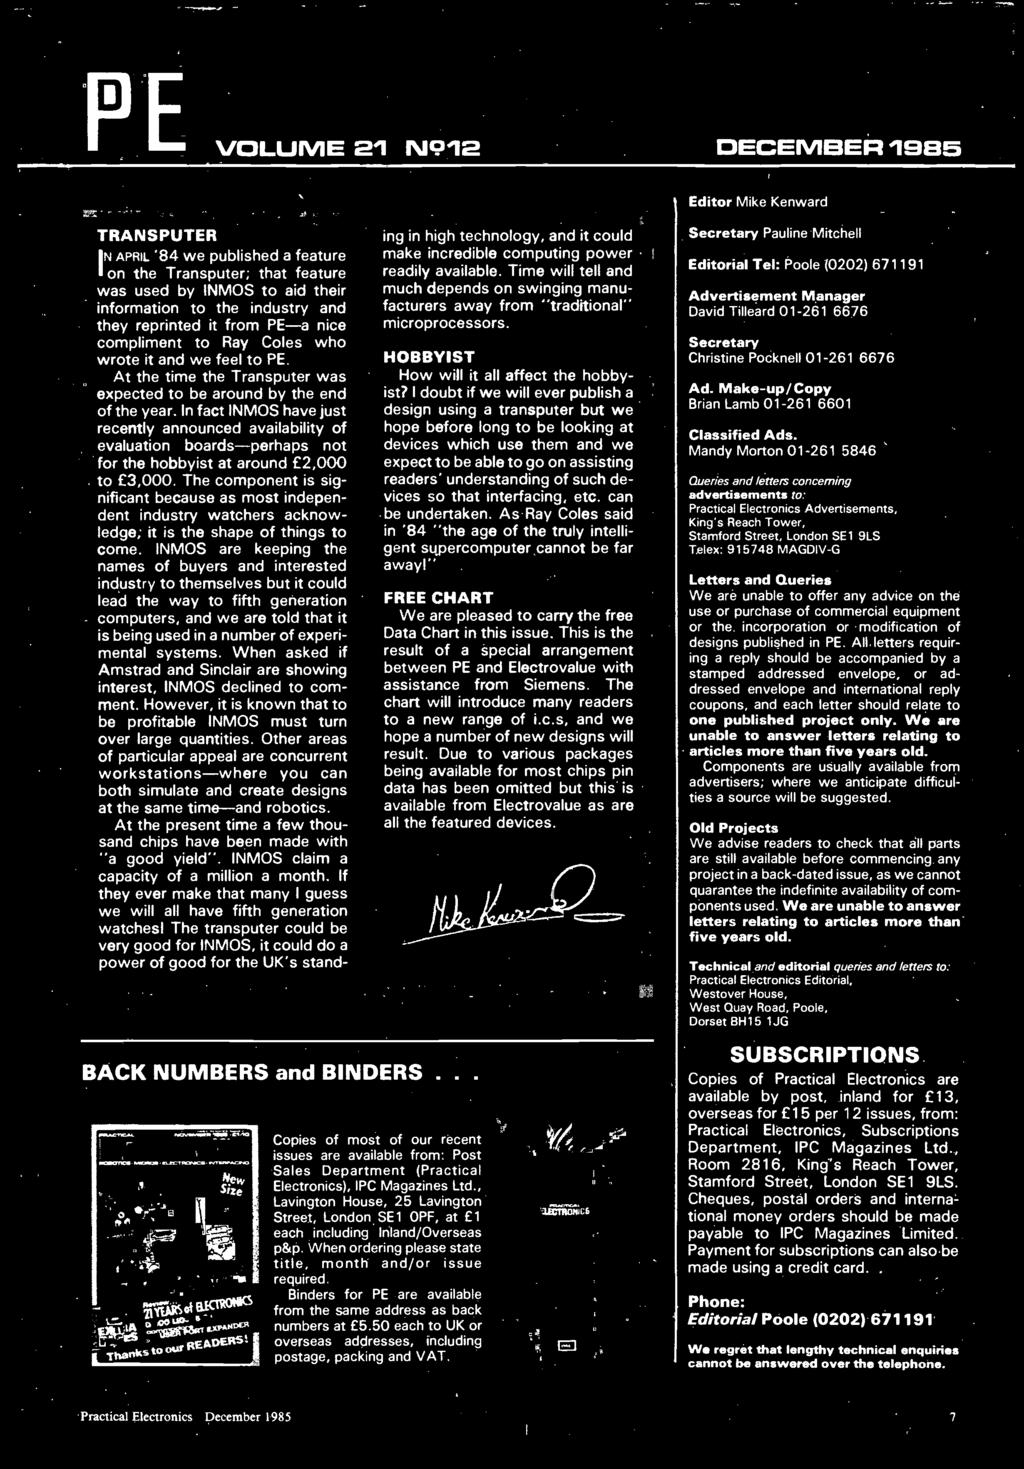 TRANSPUTER IN APRIL '84 we published a feature on the Transputer; that feature was used by INMOS to aid their information to the industry and they reprinted it from PE-a nice compliment to Ray Coles